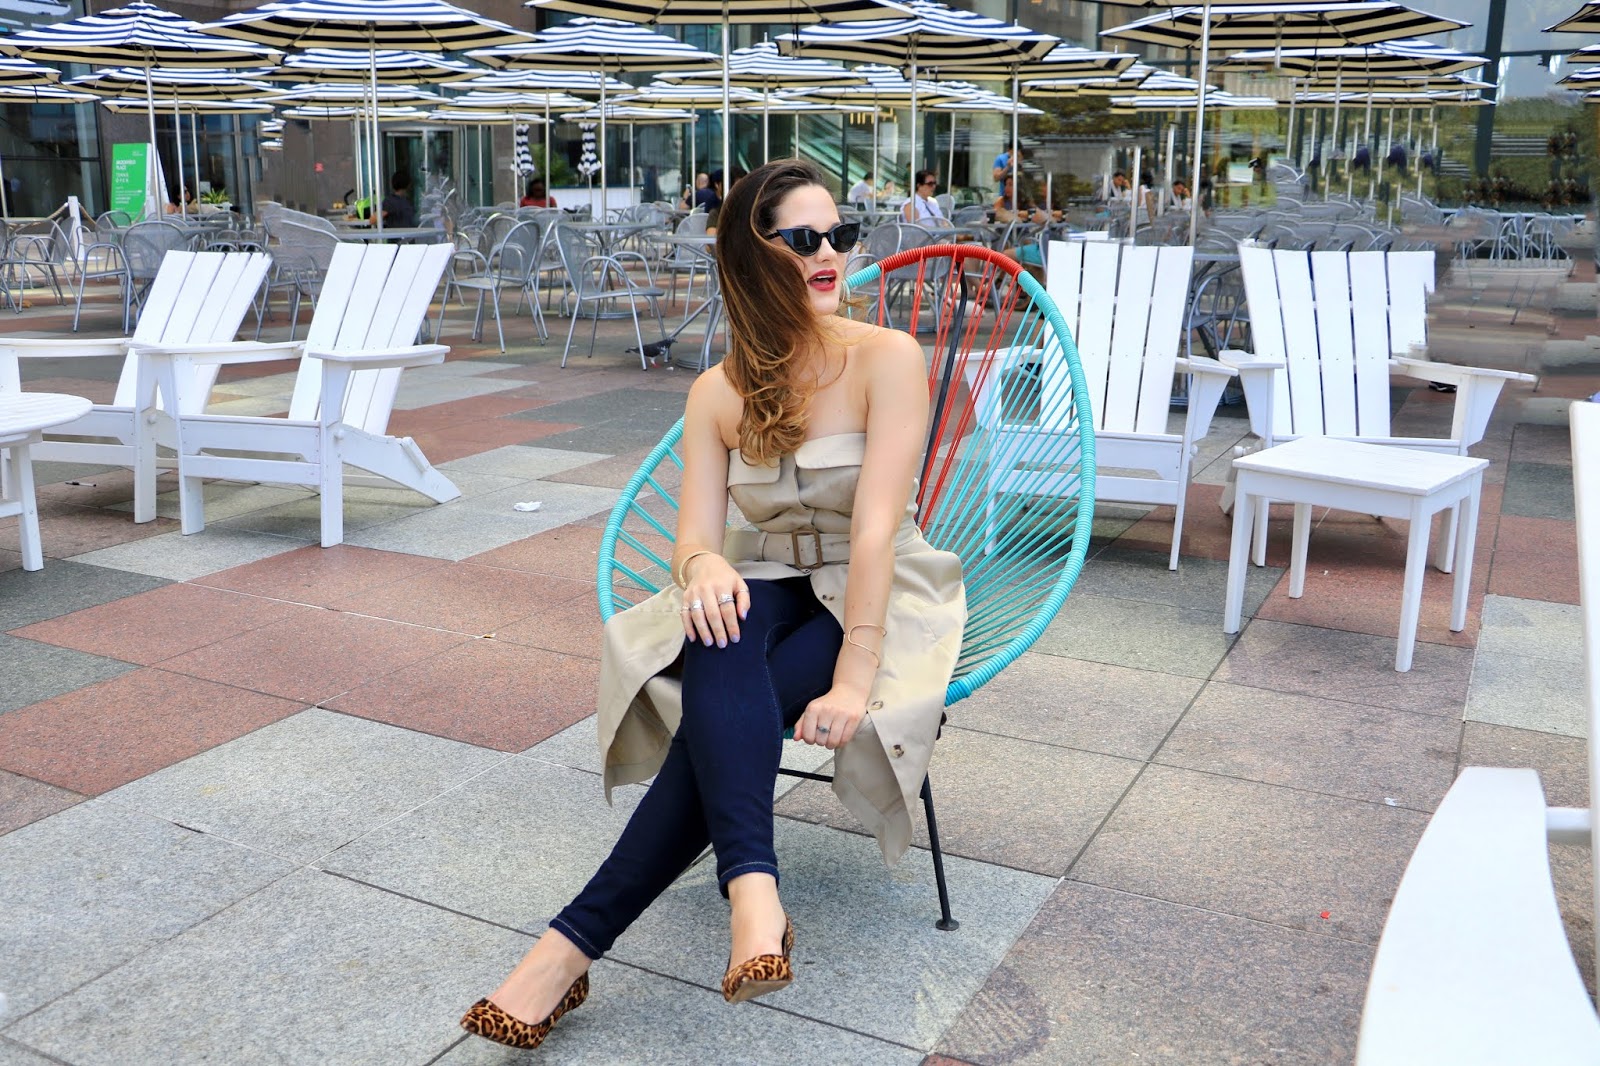 Nyc fashion blogger Kathleen Harper's fall outfit ideas